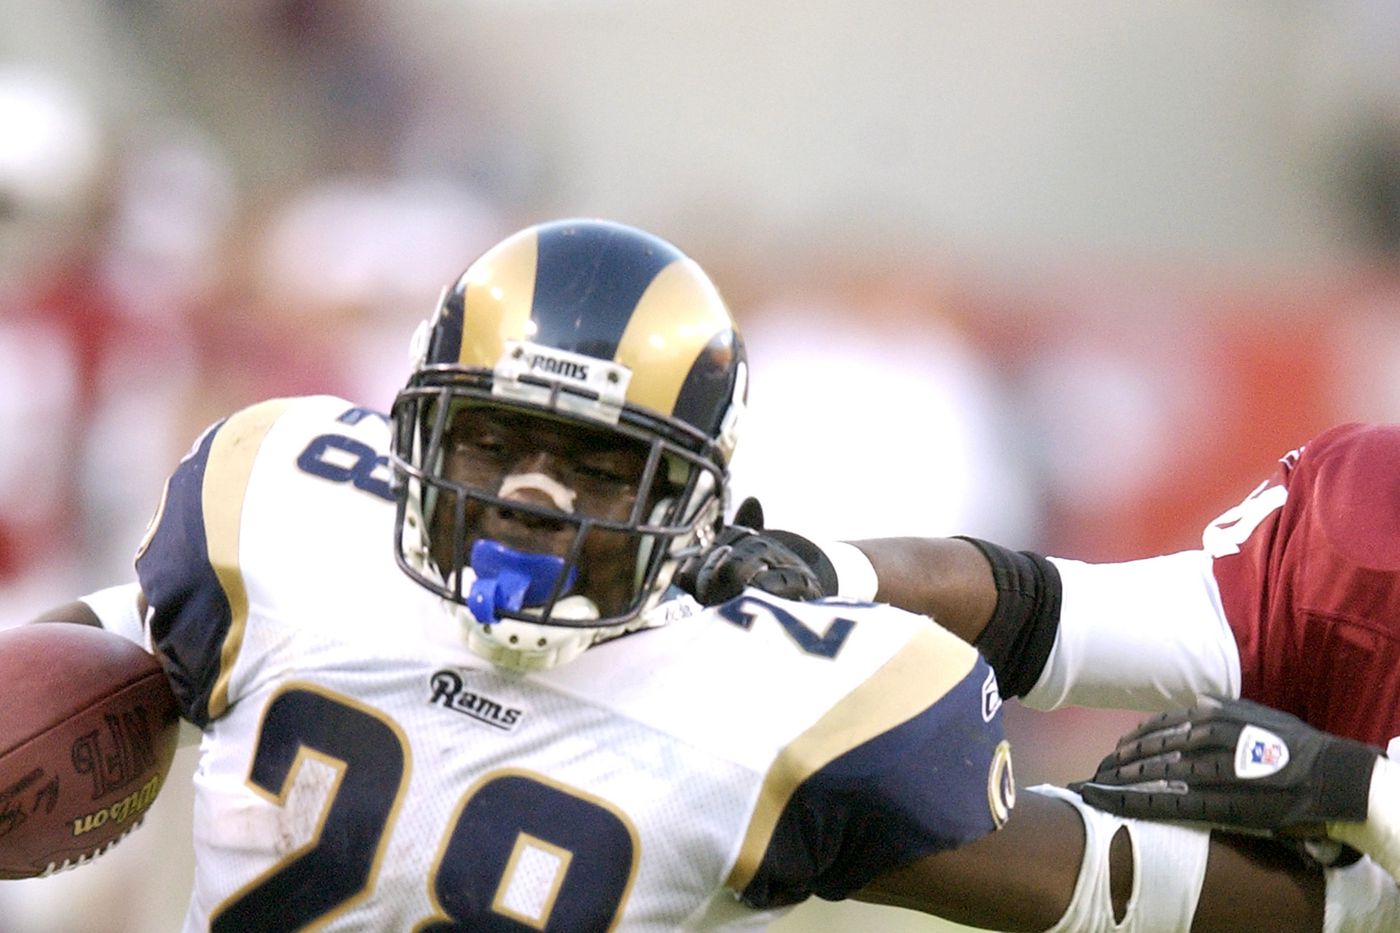 Will the NFL ever have a running back like Marshall Faulk again? Show Times